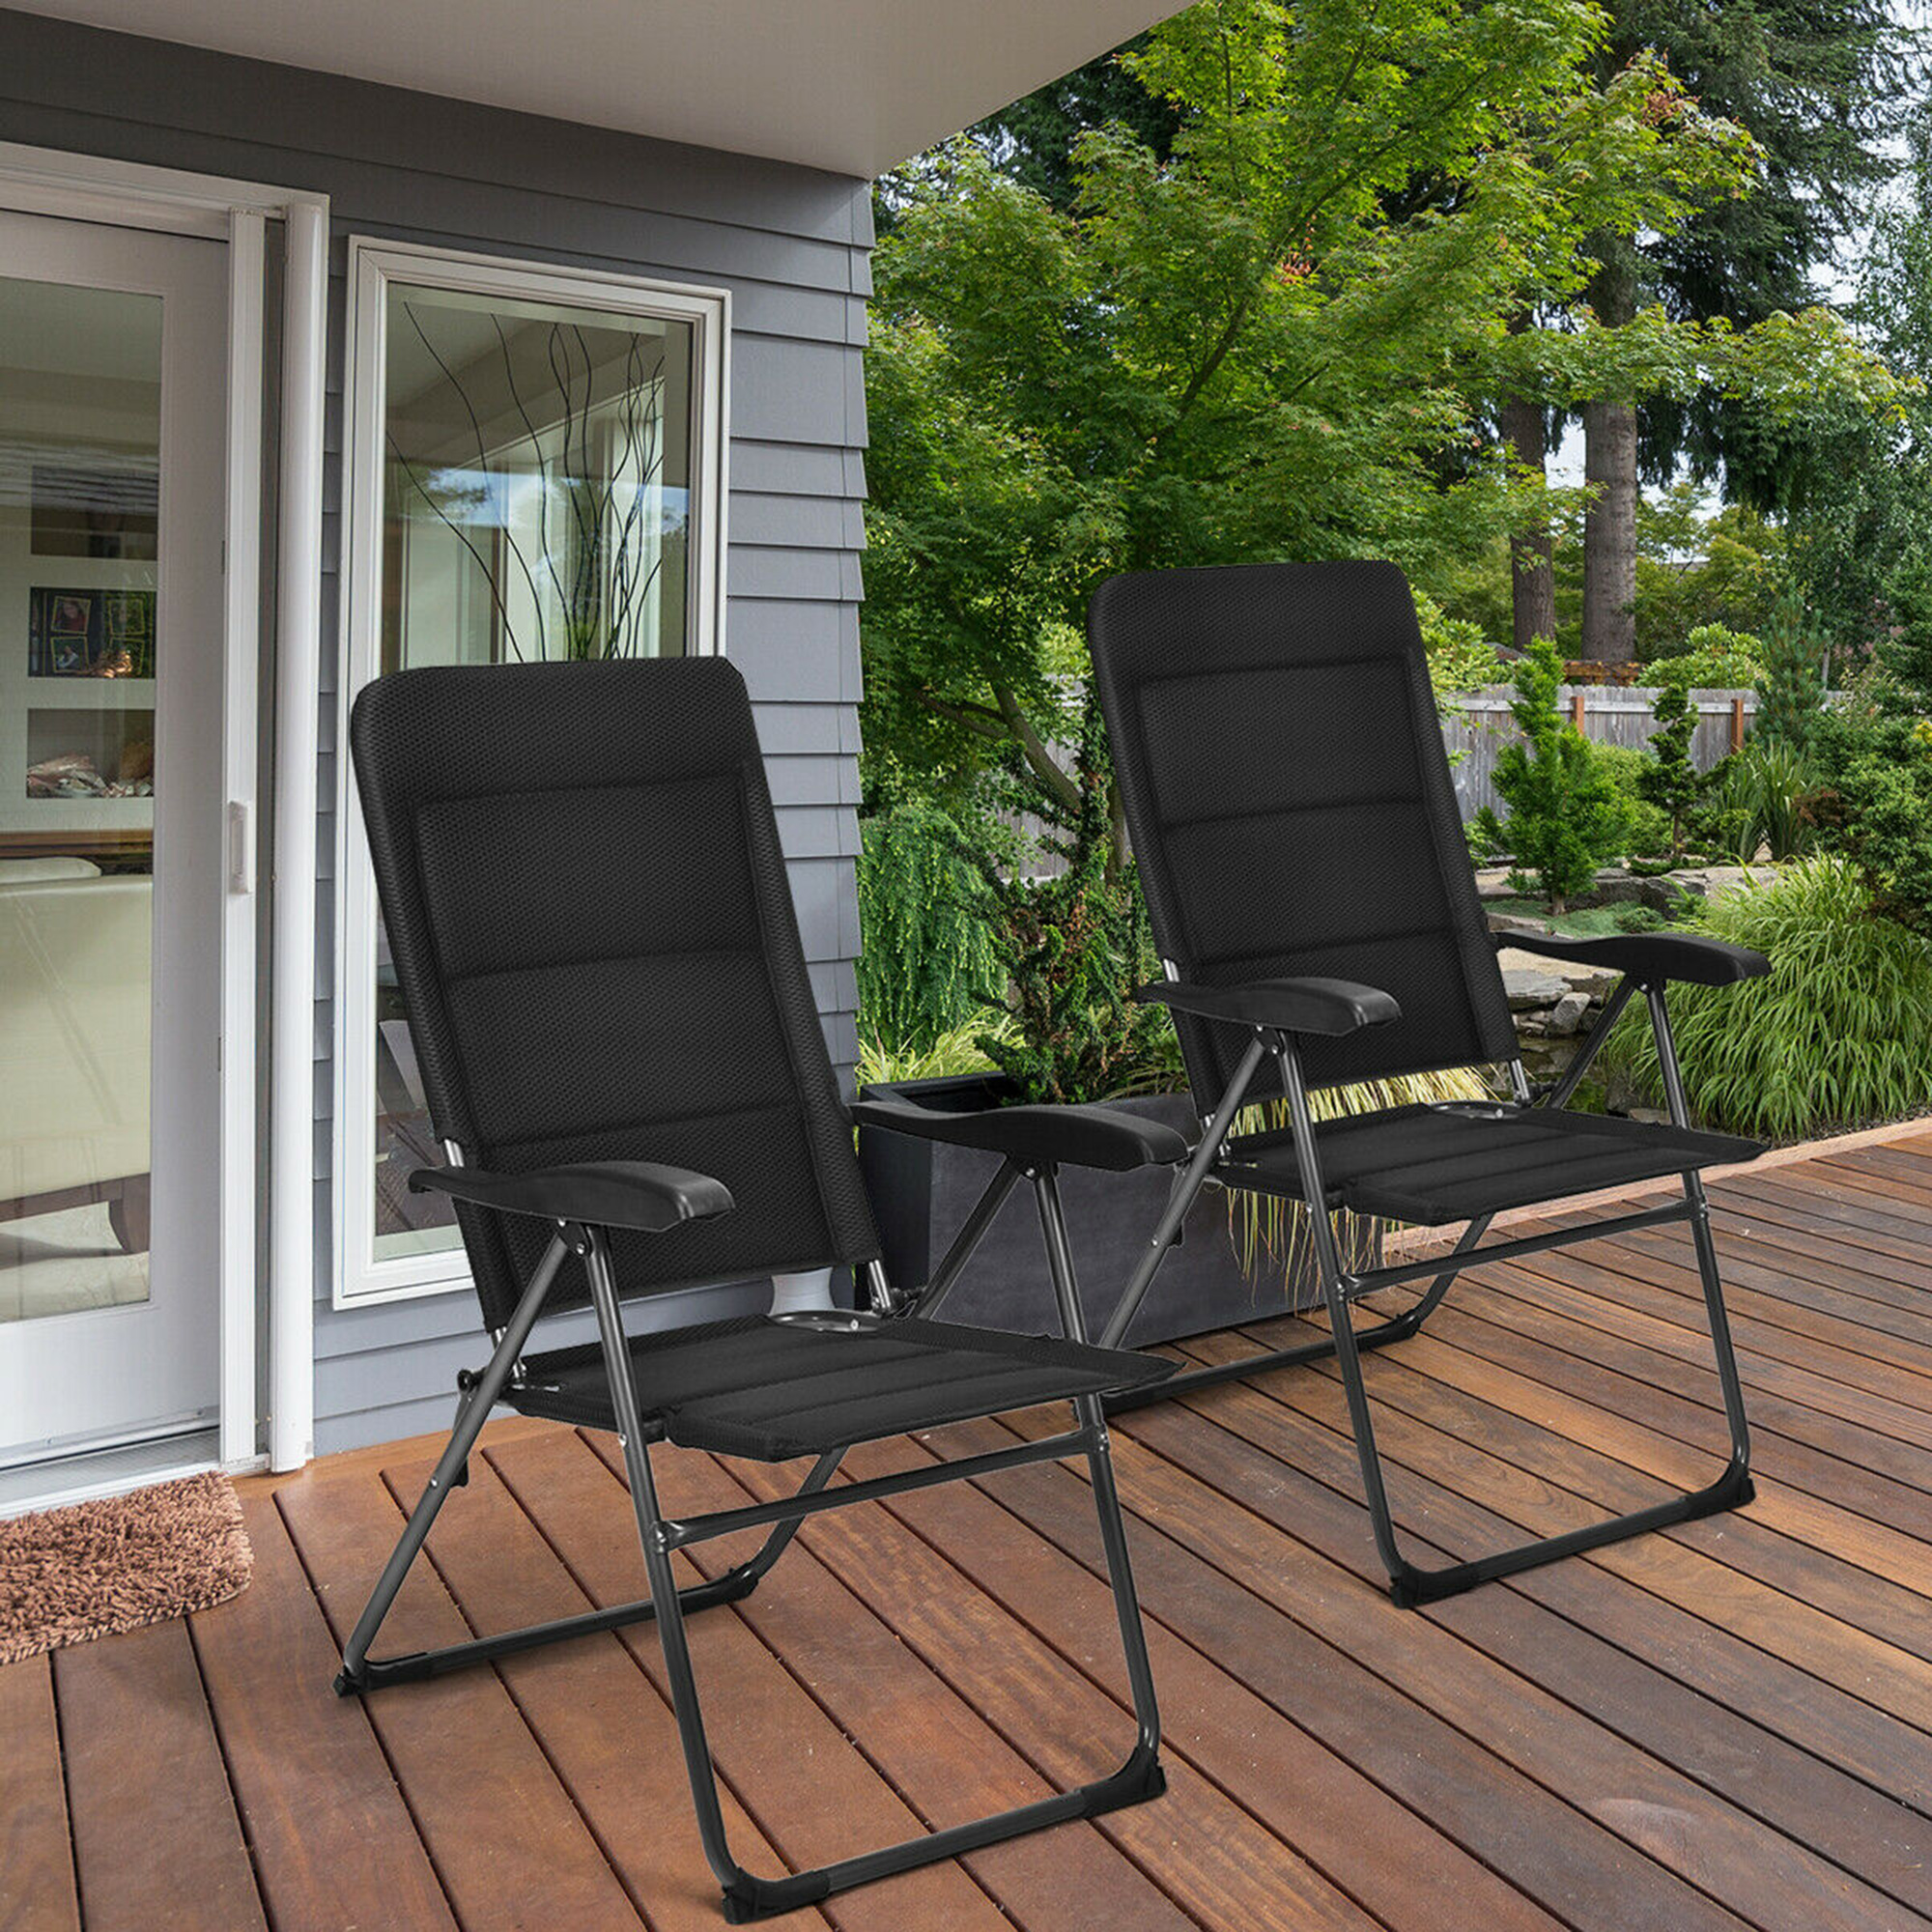 Gymax 2PCS Patio Folding Chairs Back Adjustable Reclining Padded Garden Furniture - image 1 of 10